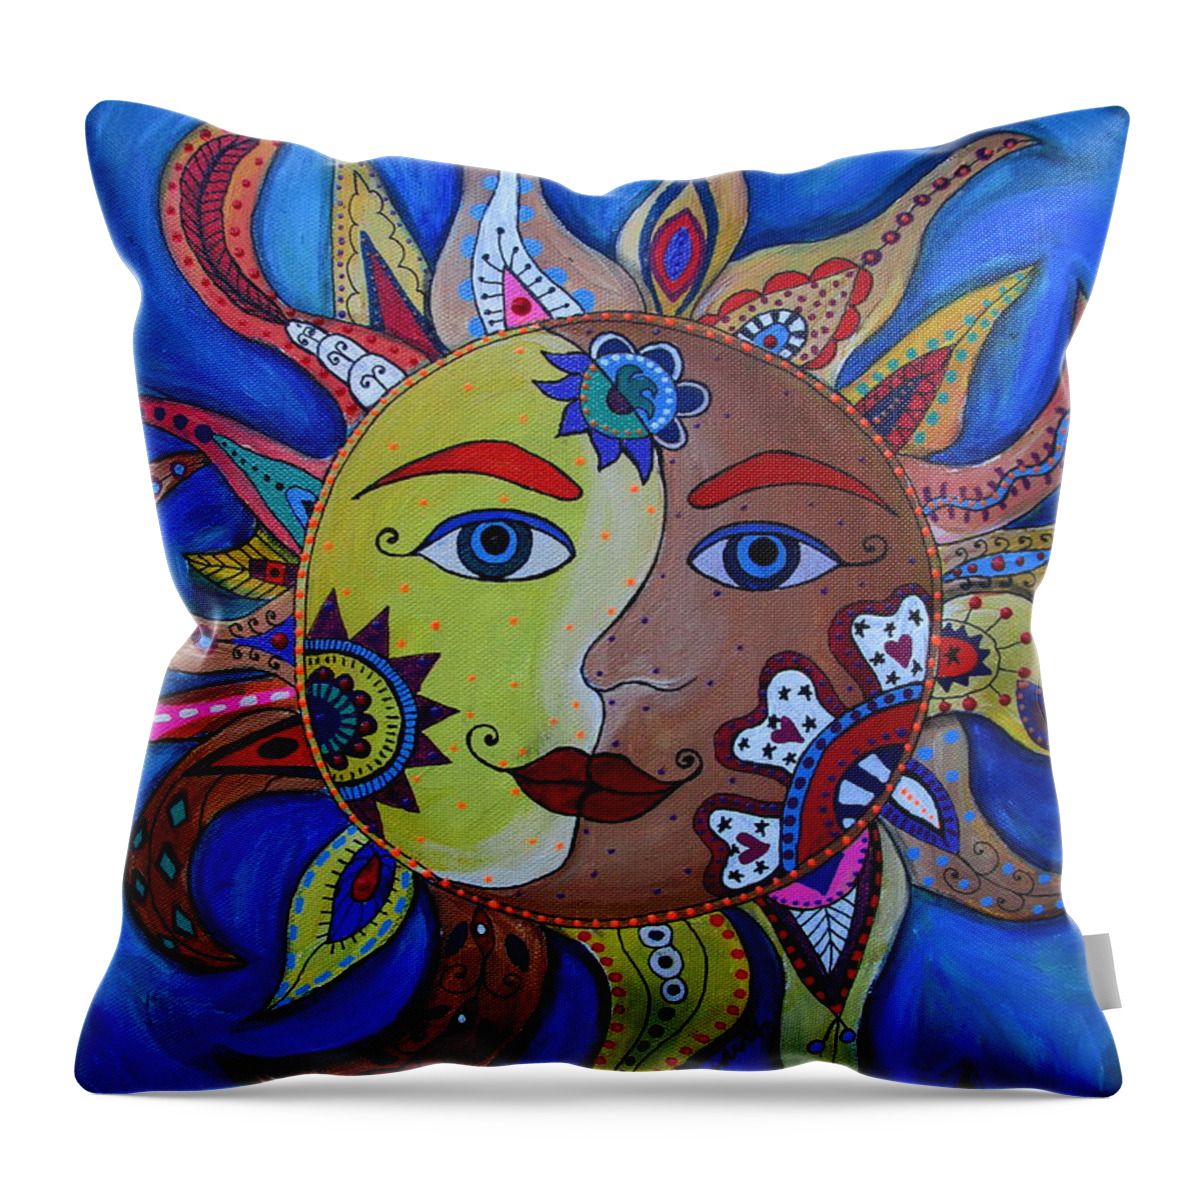 Sun And Moon Throw Pillow featuring the painting Celestial Sun And Moon by Pristine Cartera Turkus